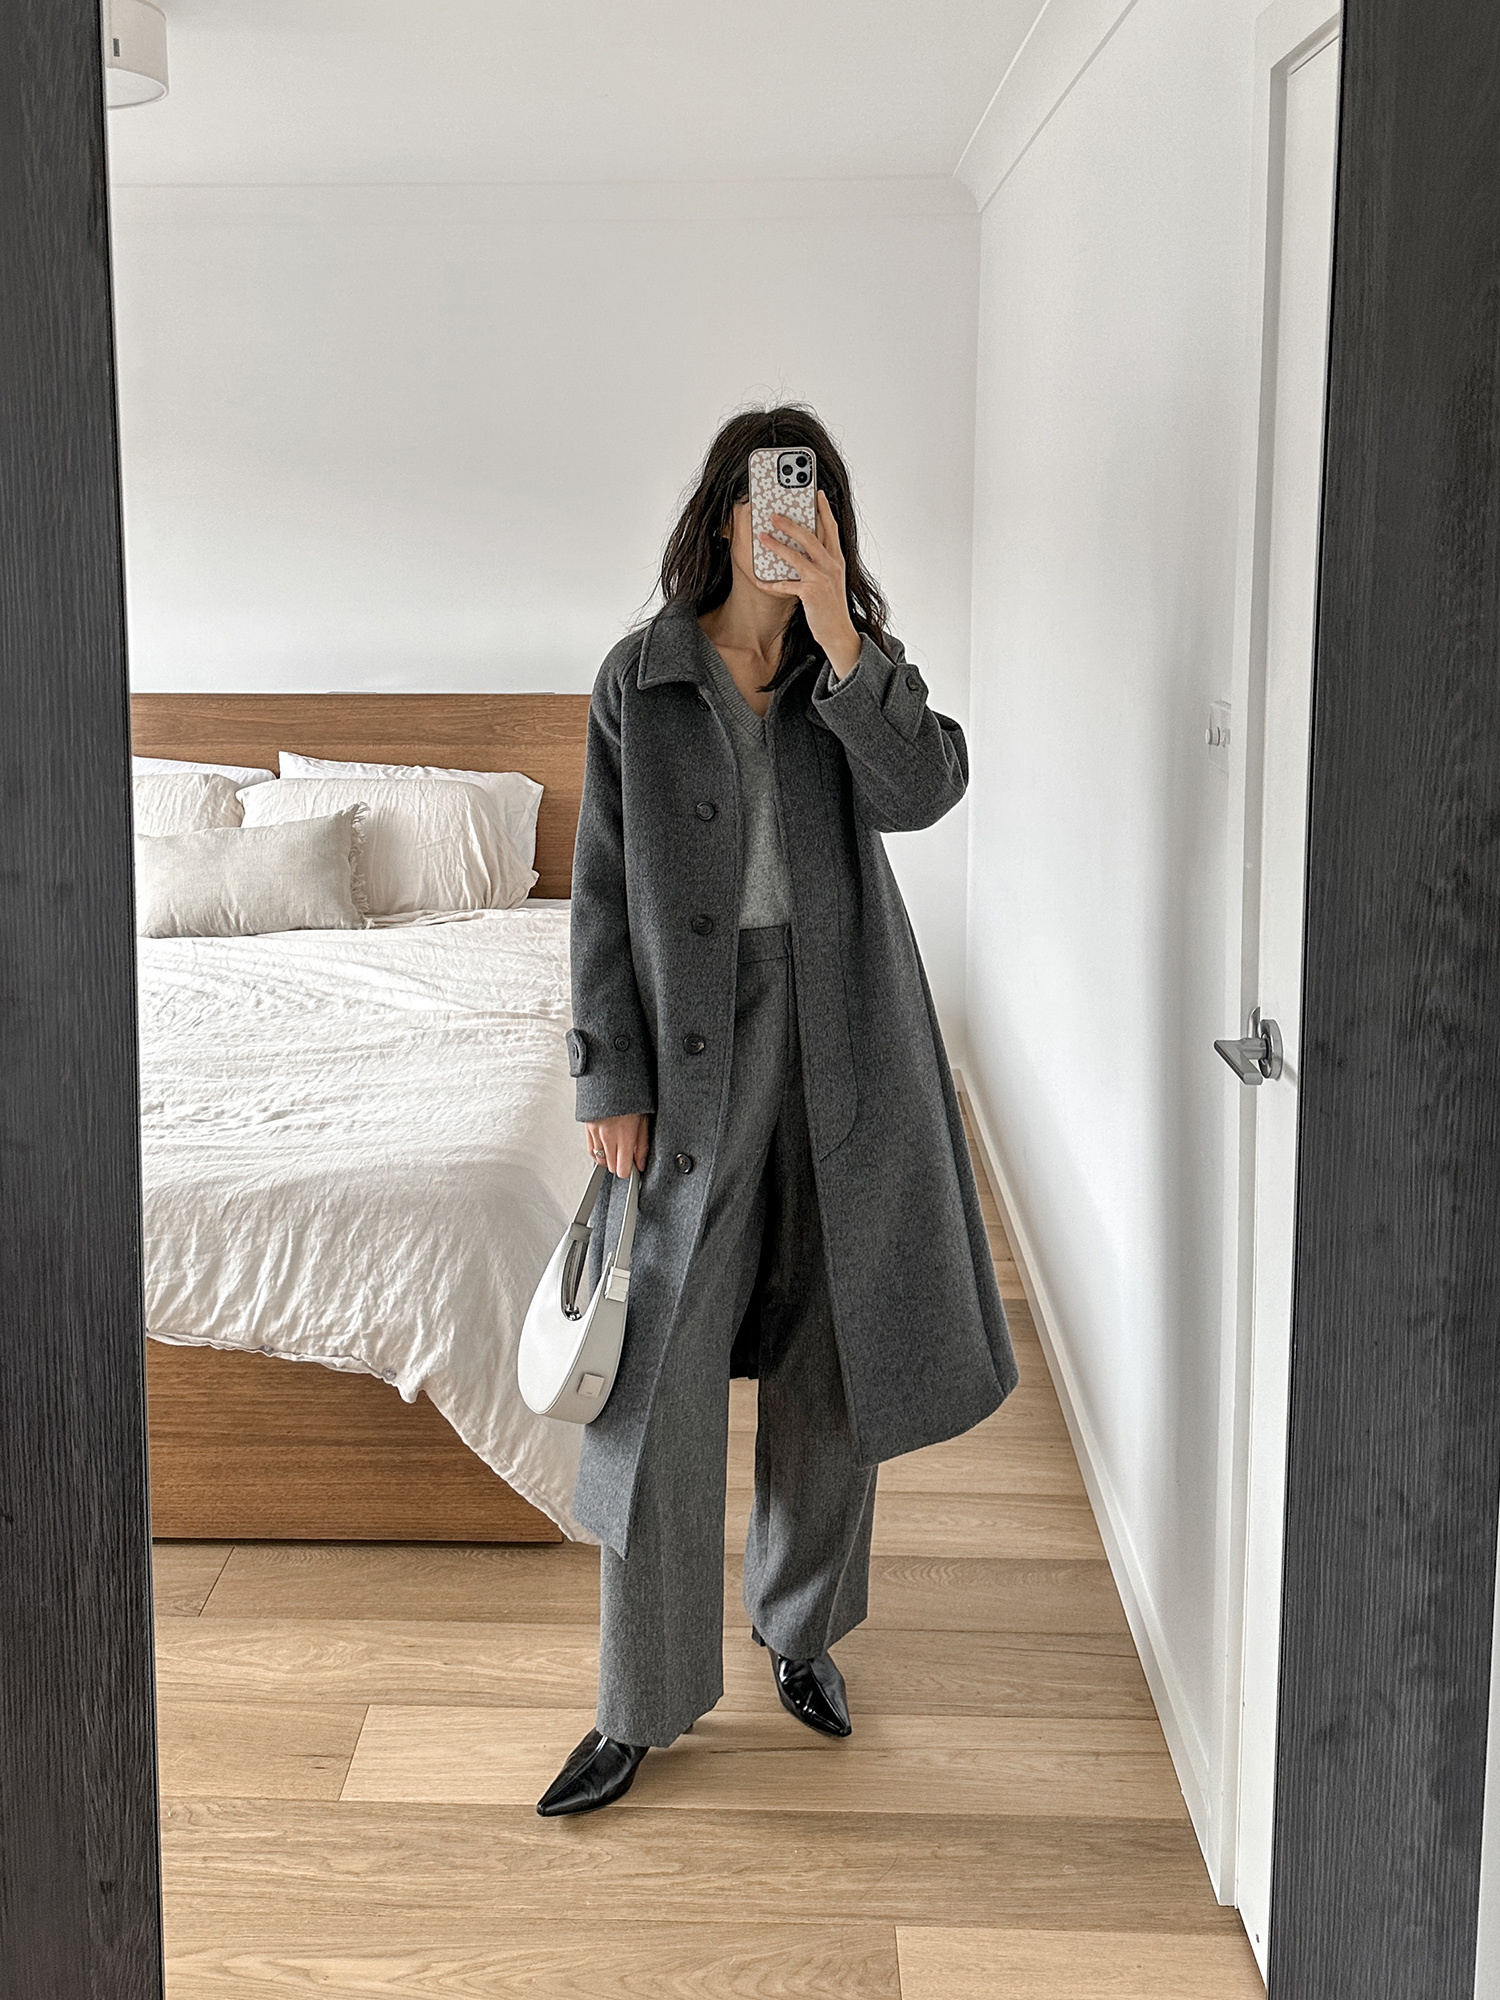 The relaxed winter capsule wardrobe - Mademoiselle